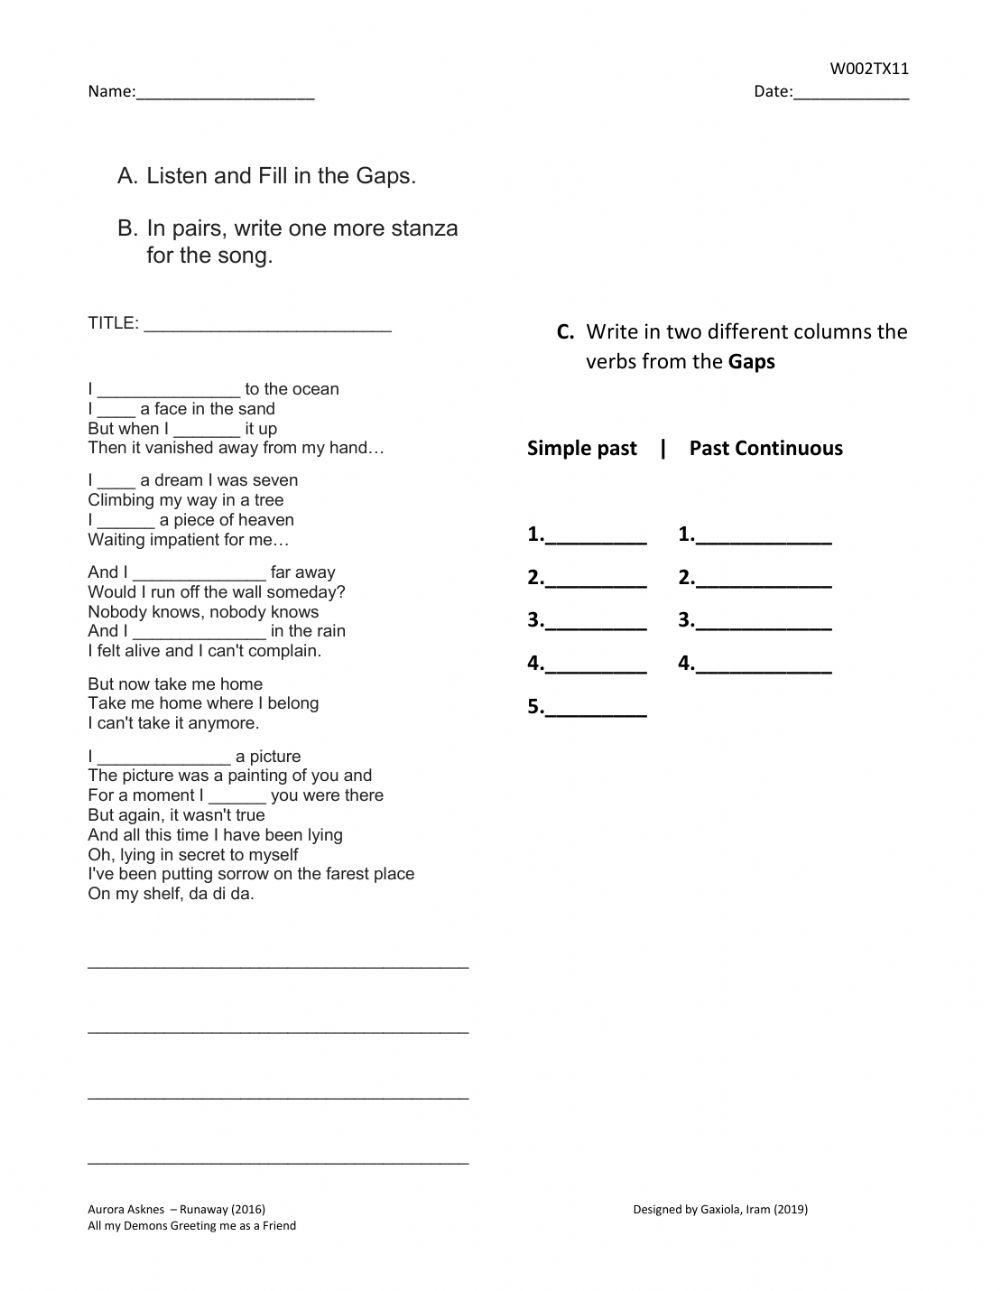 Worksheet-Listening-Aurora-simple-past-and-past-continuous